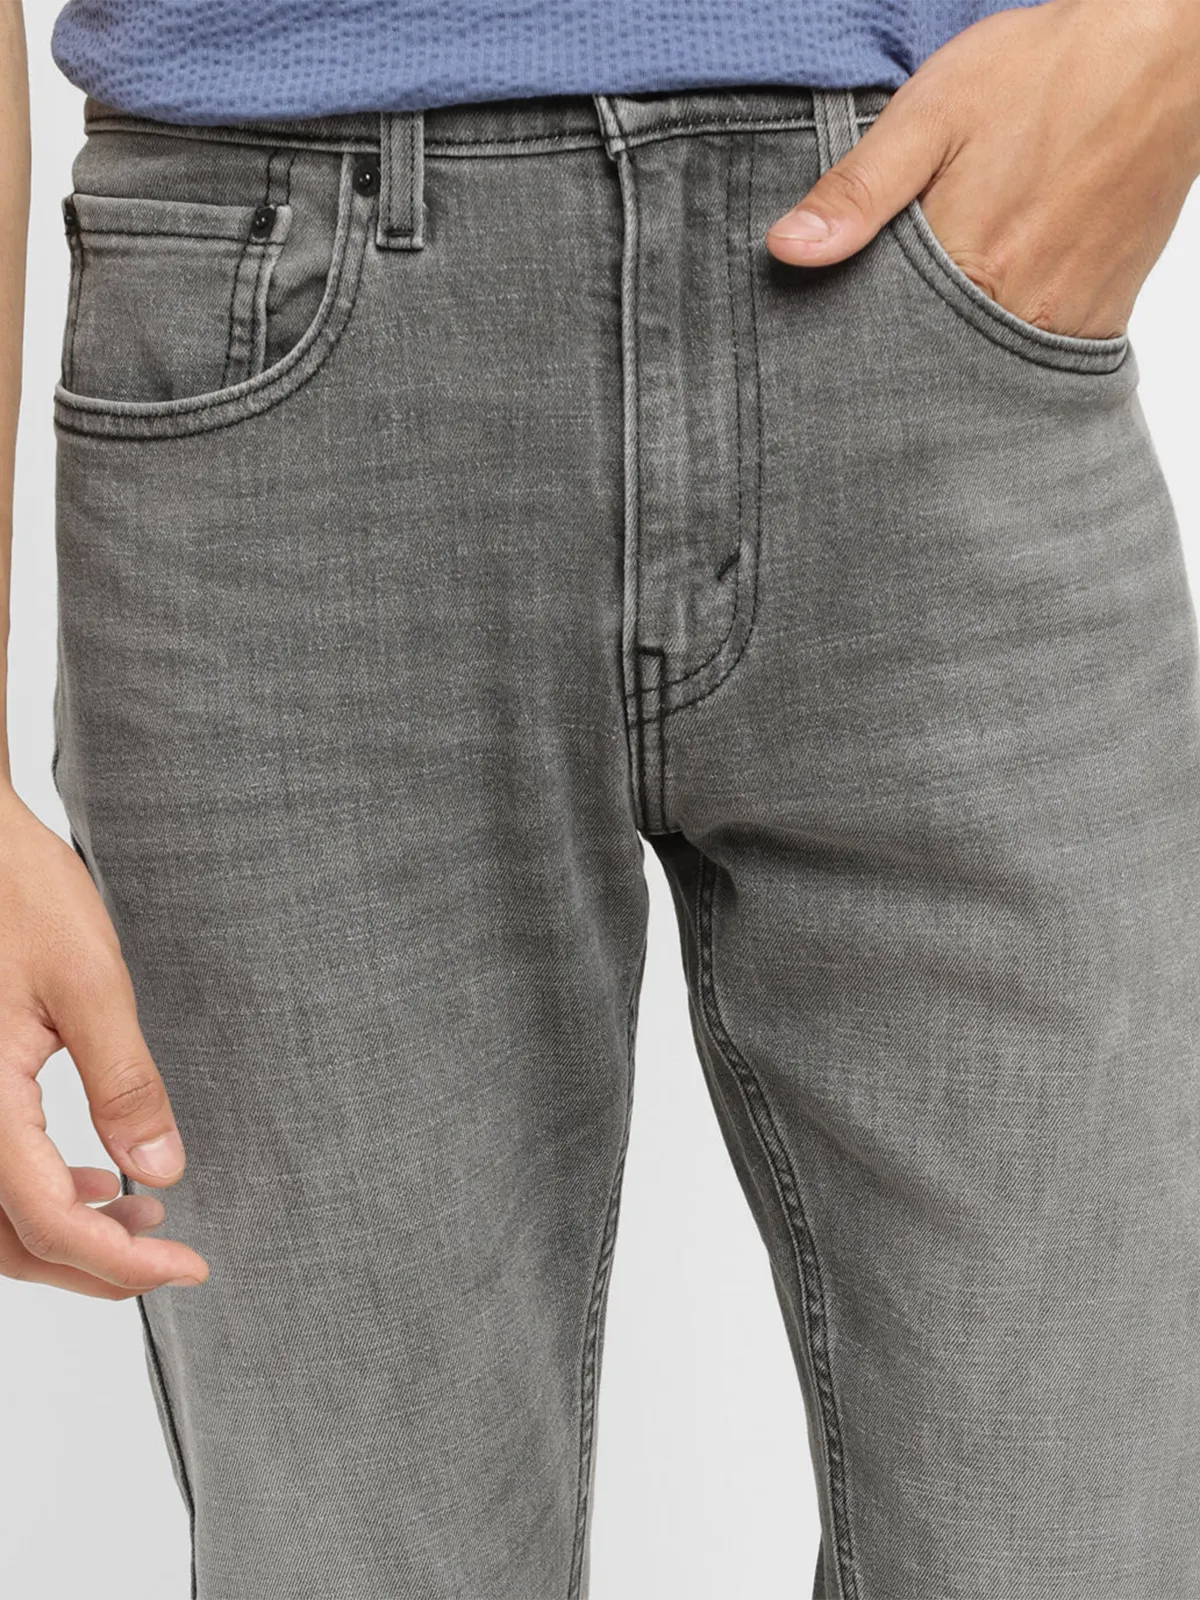 LEVIS grey washed slim tapered fit jeans